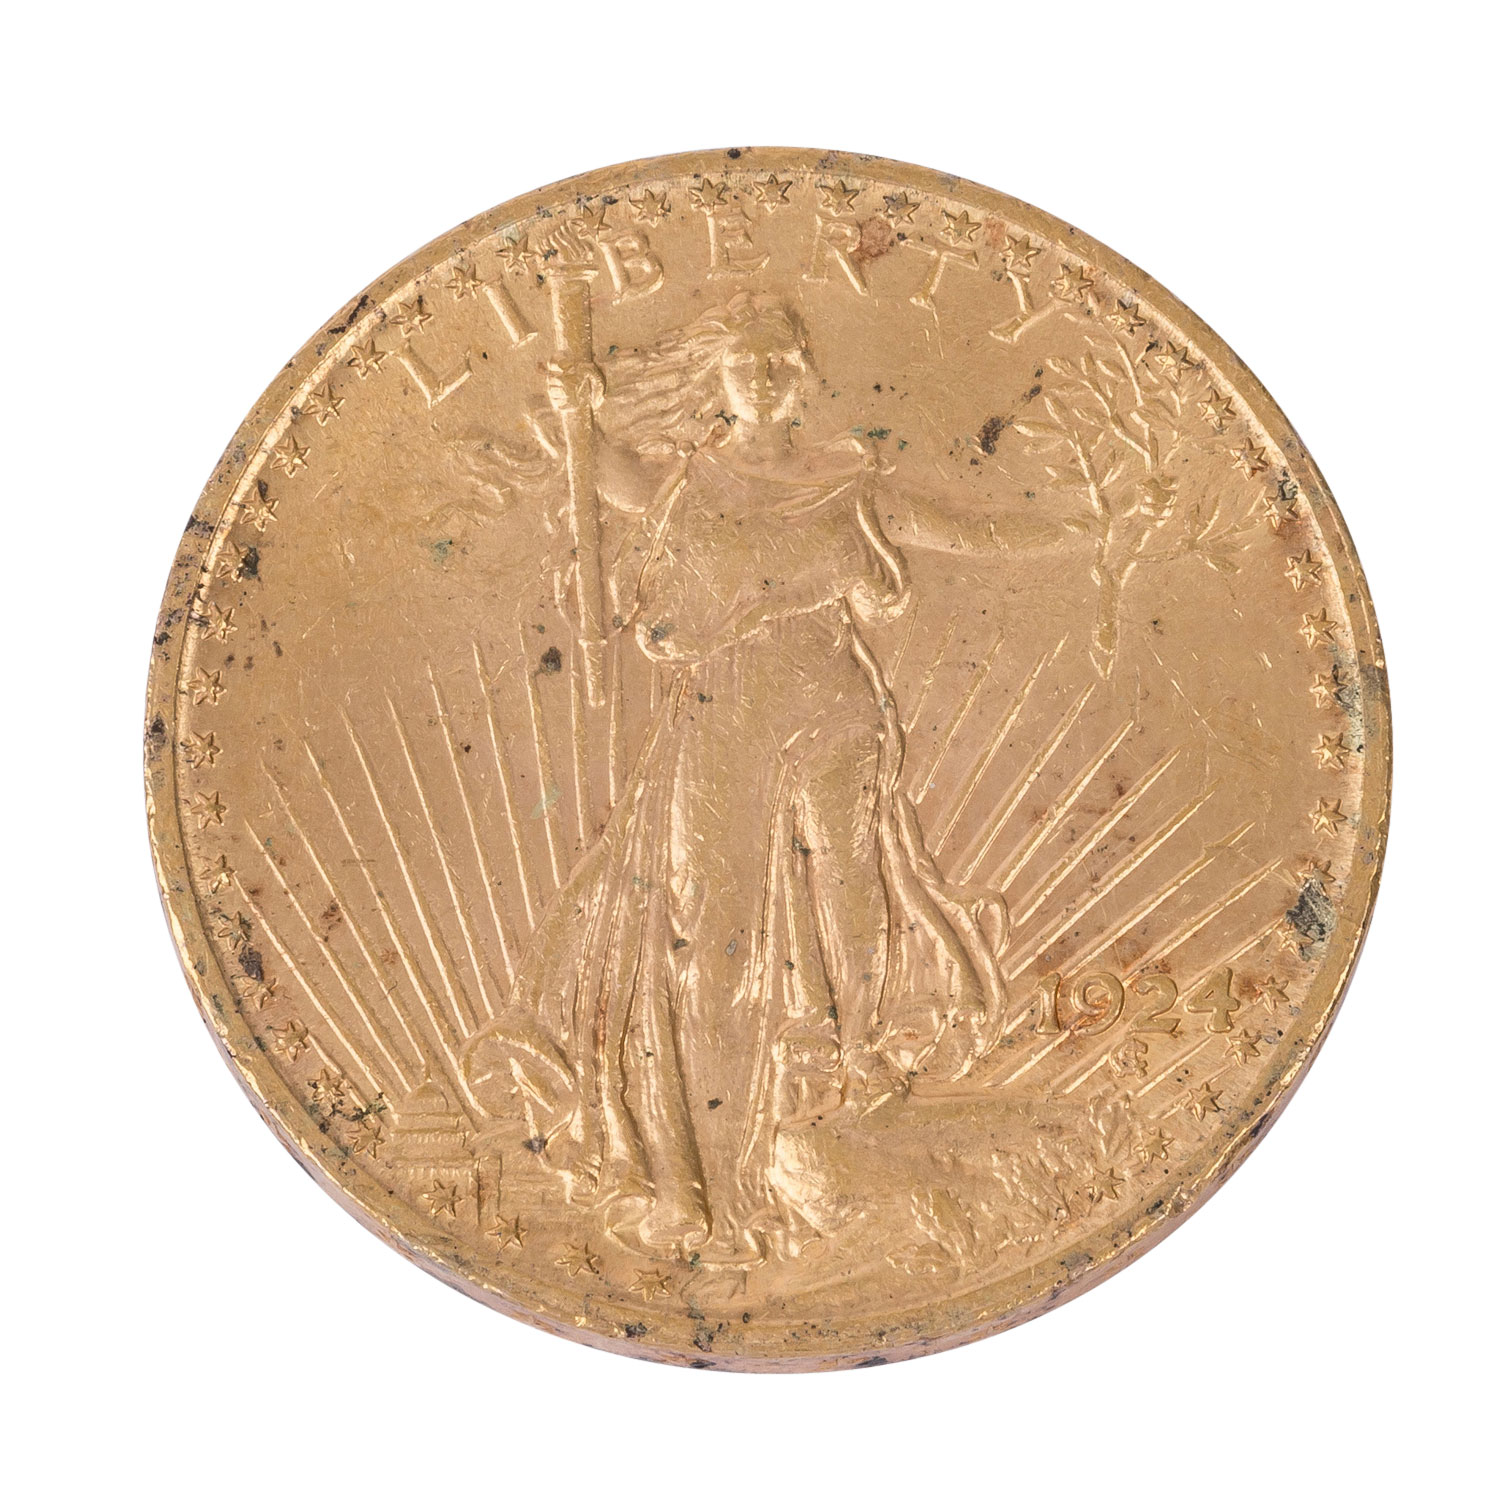 USA /GOLD - 20$ Double Eagle St. Gaudens 1924 - Image 2 of 2